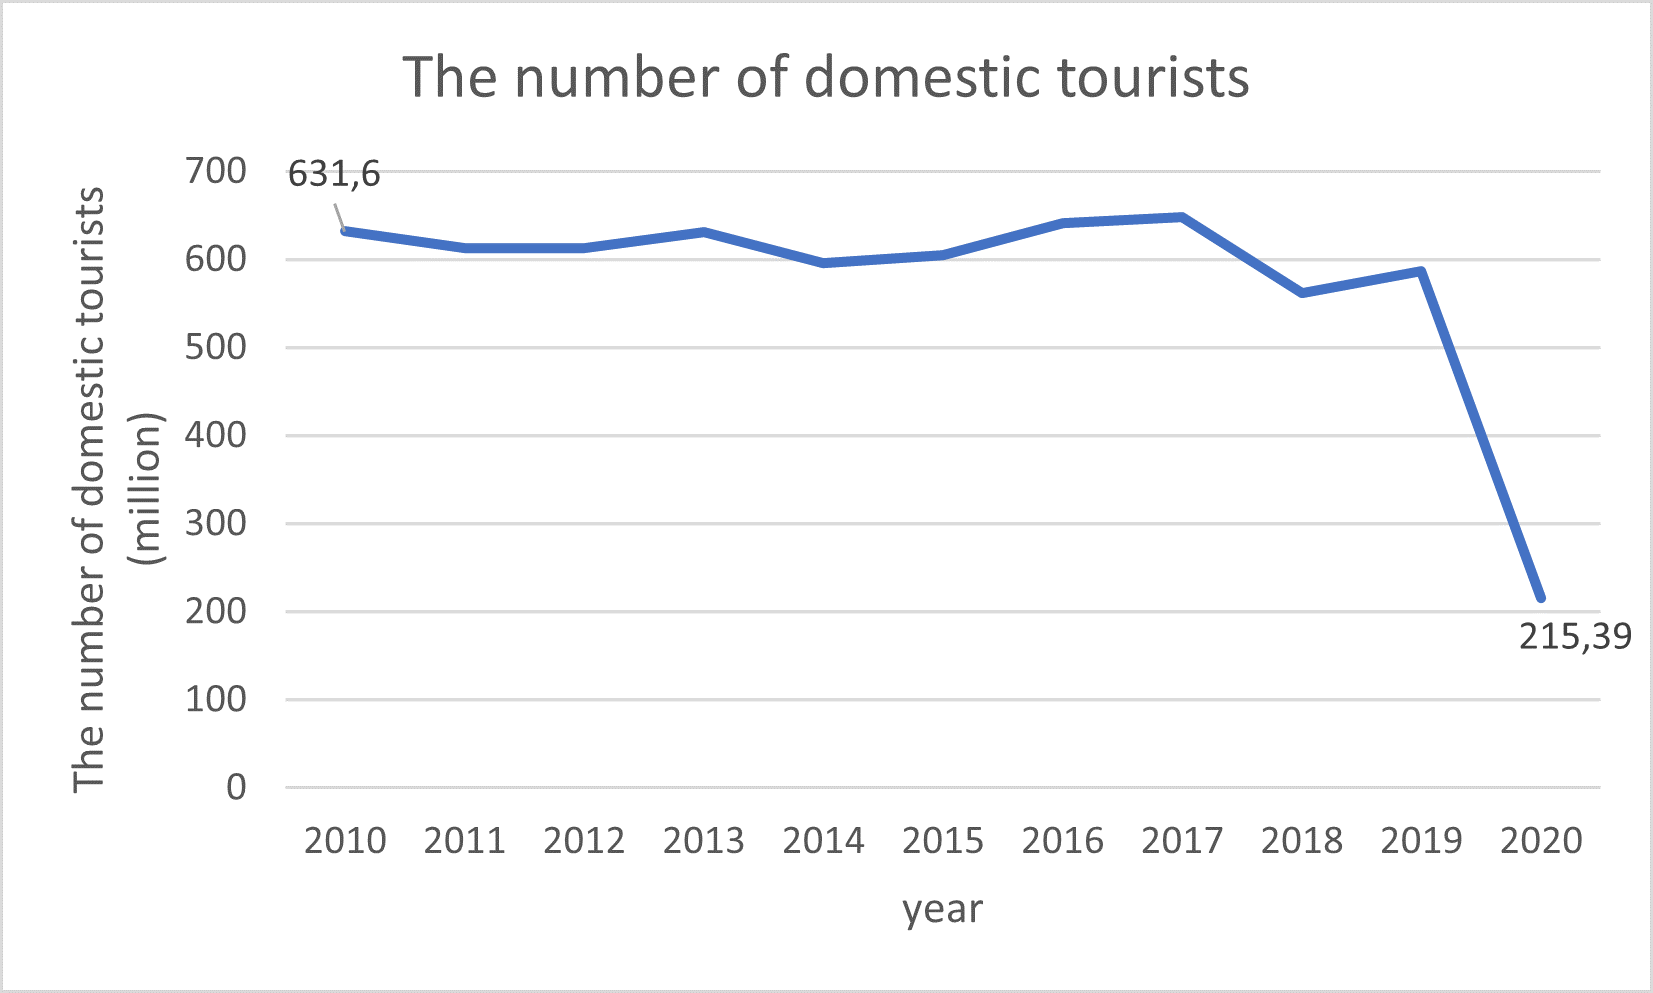 The number of domestic tourists